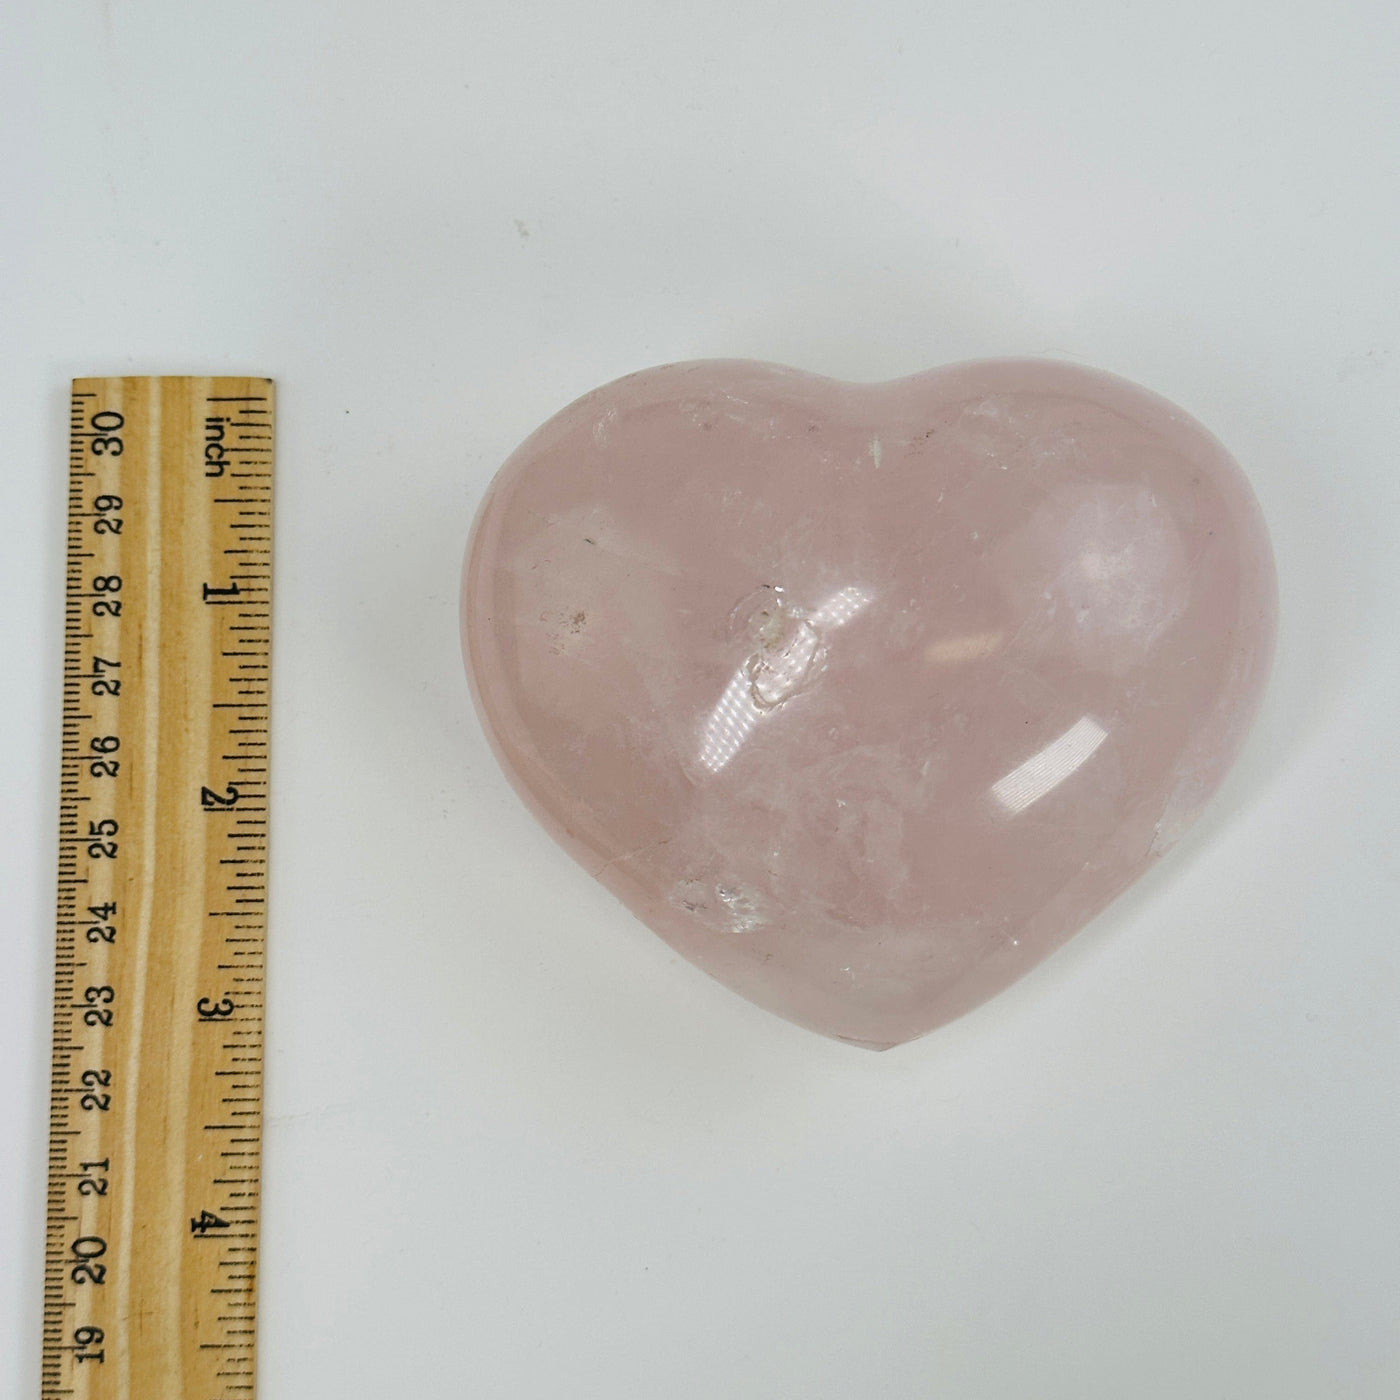 Rose Quart puff heart next to a ruler for size reference